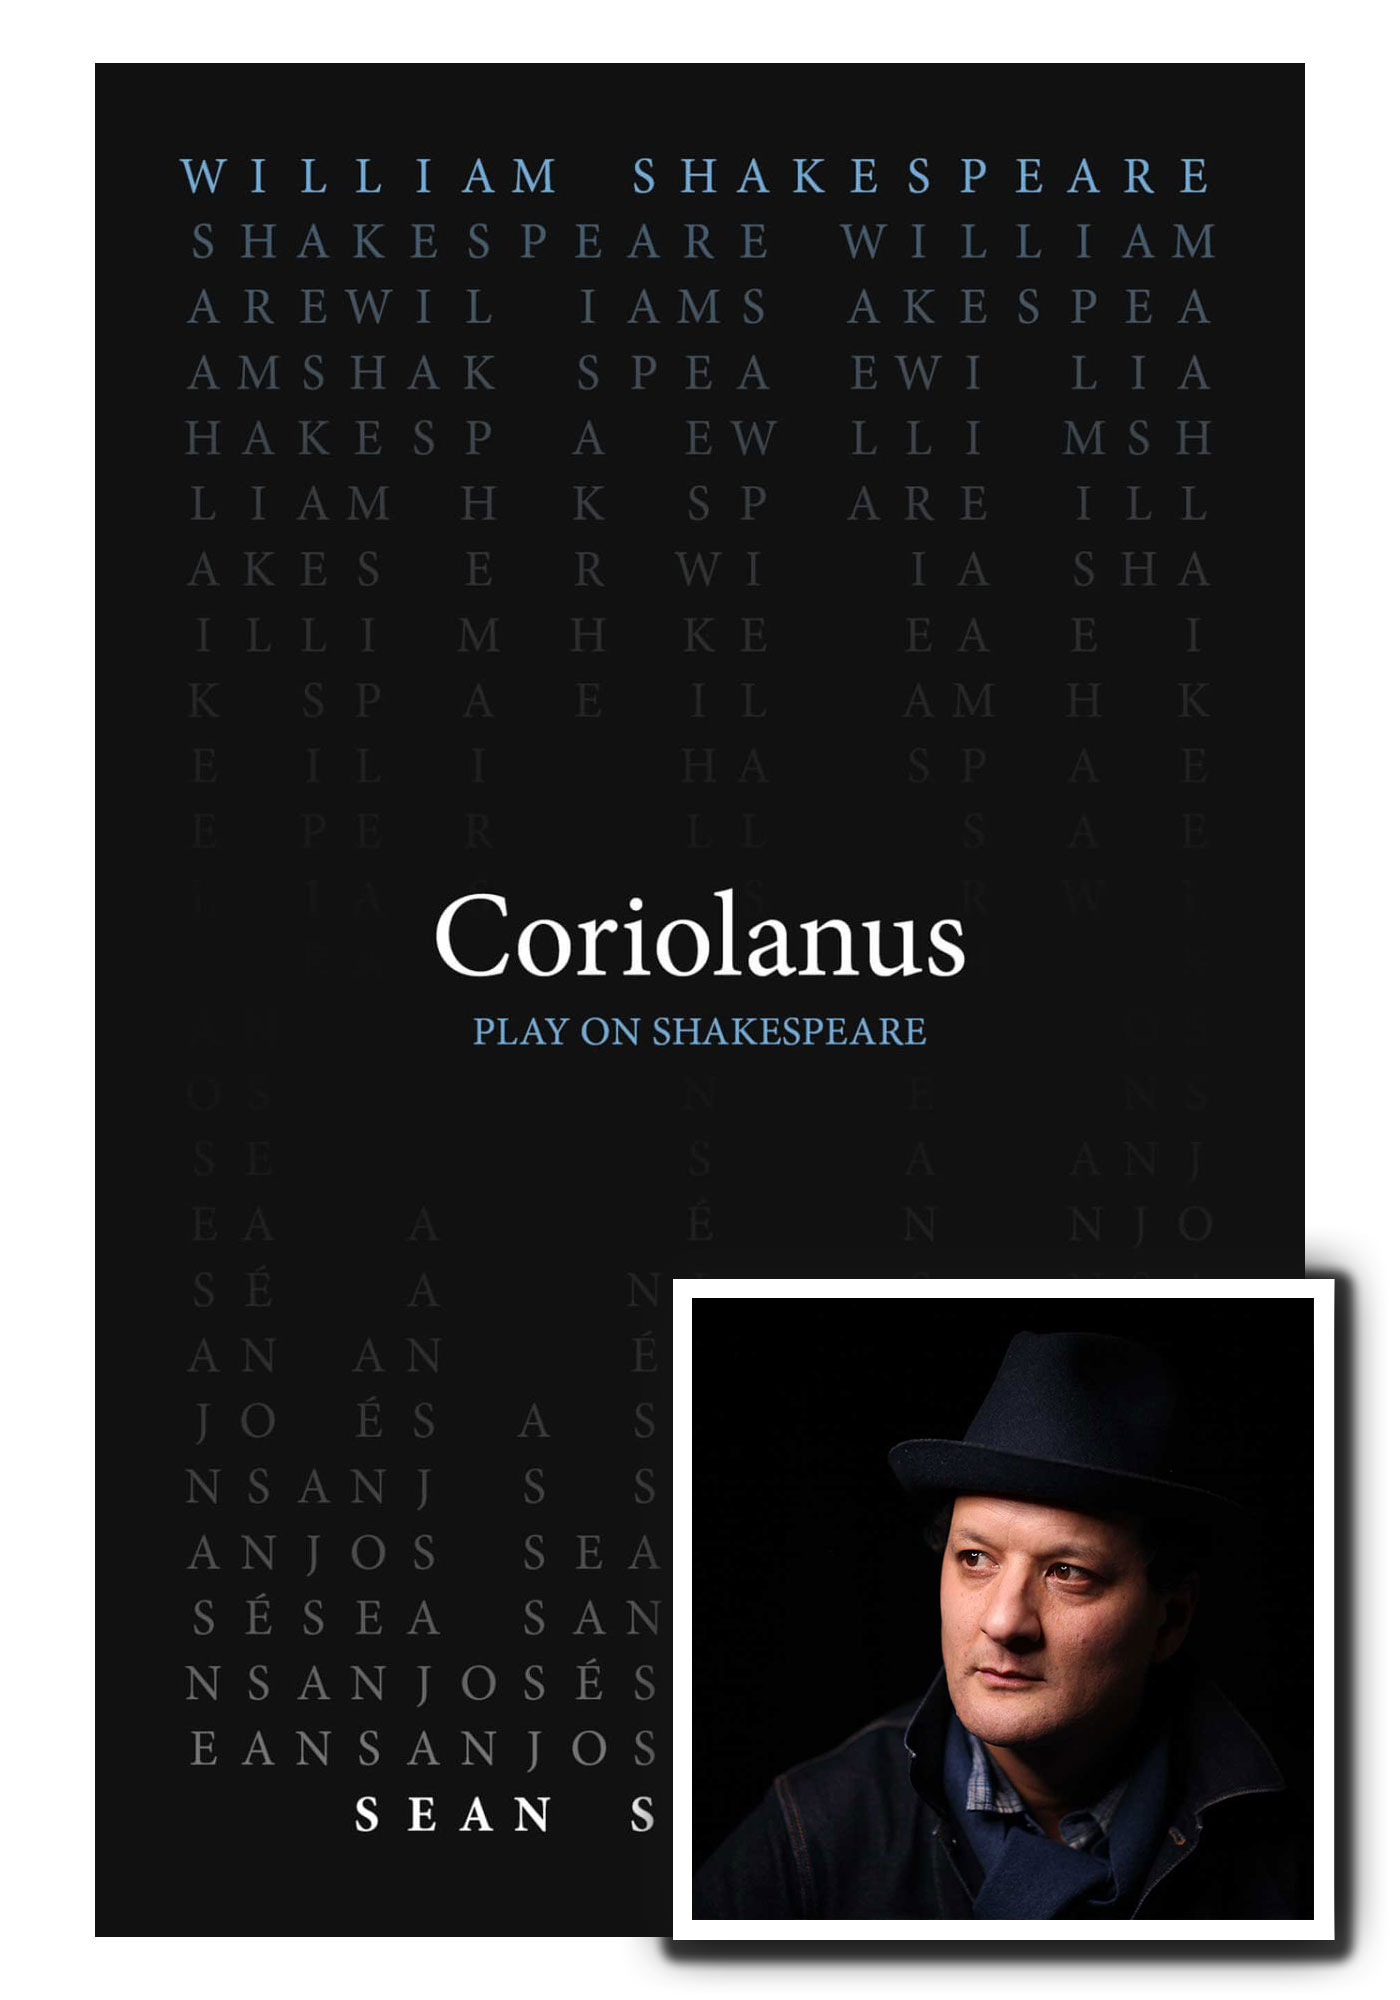 Cover of the Coriolanus script from ACMRS Press with an image of the author, Sean San Jose